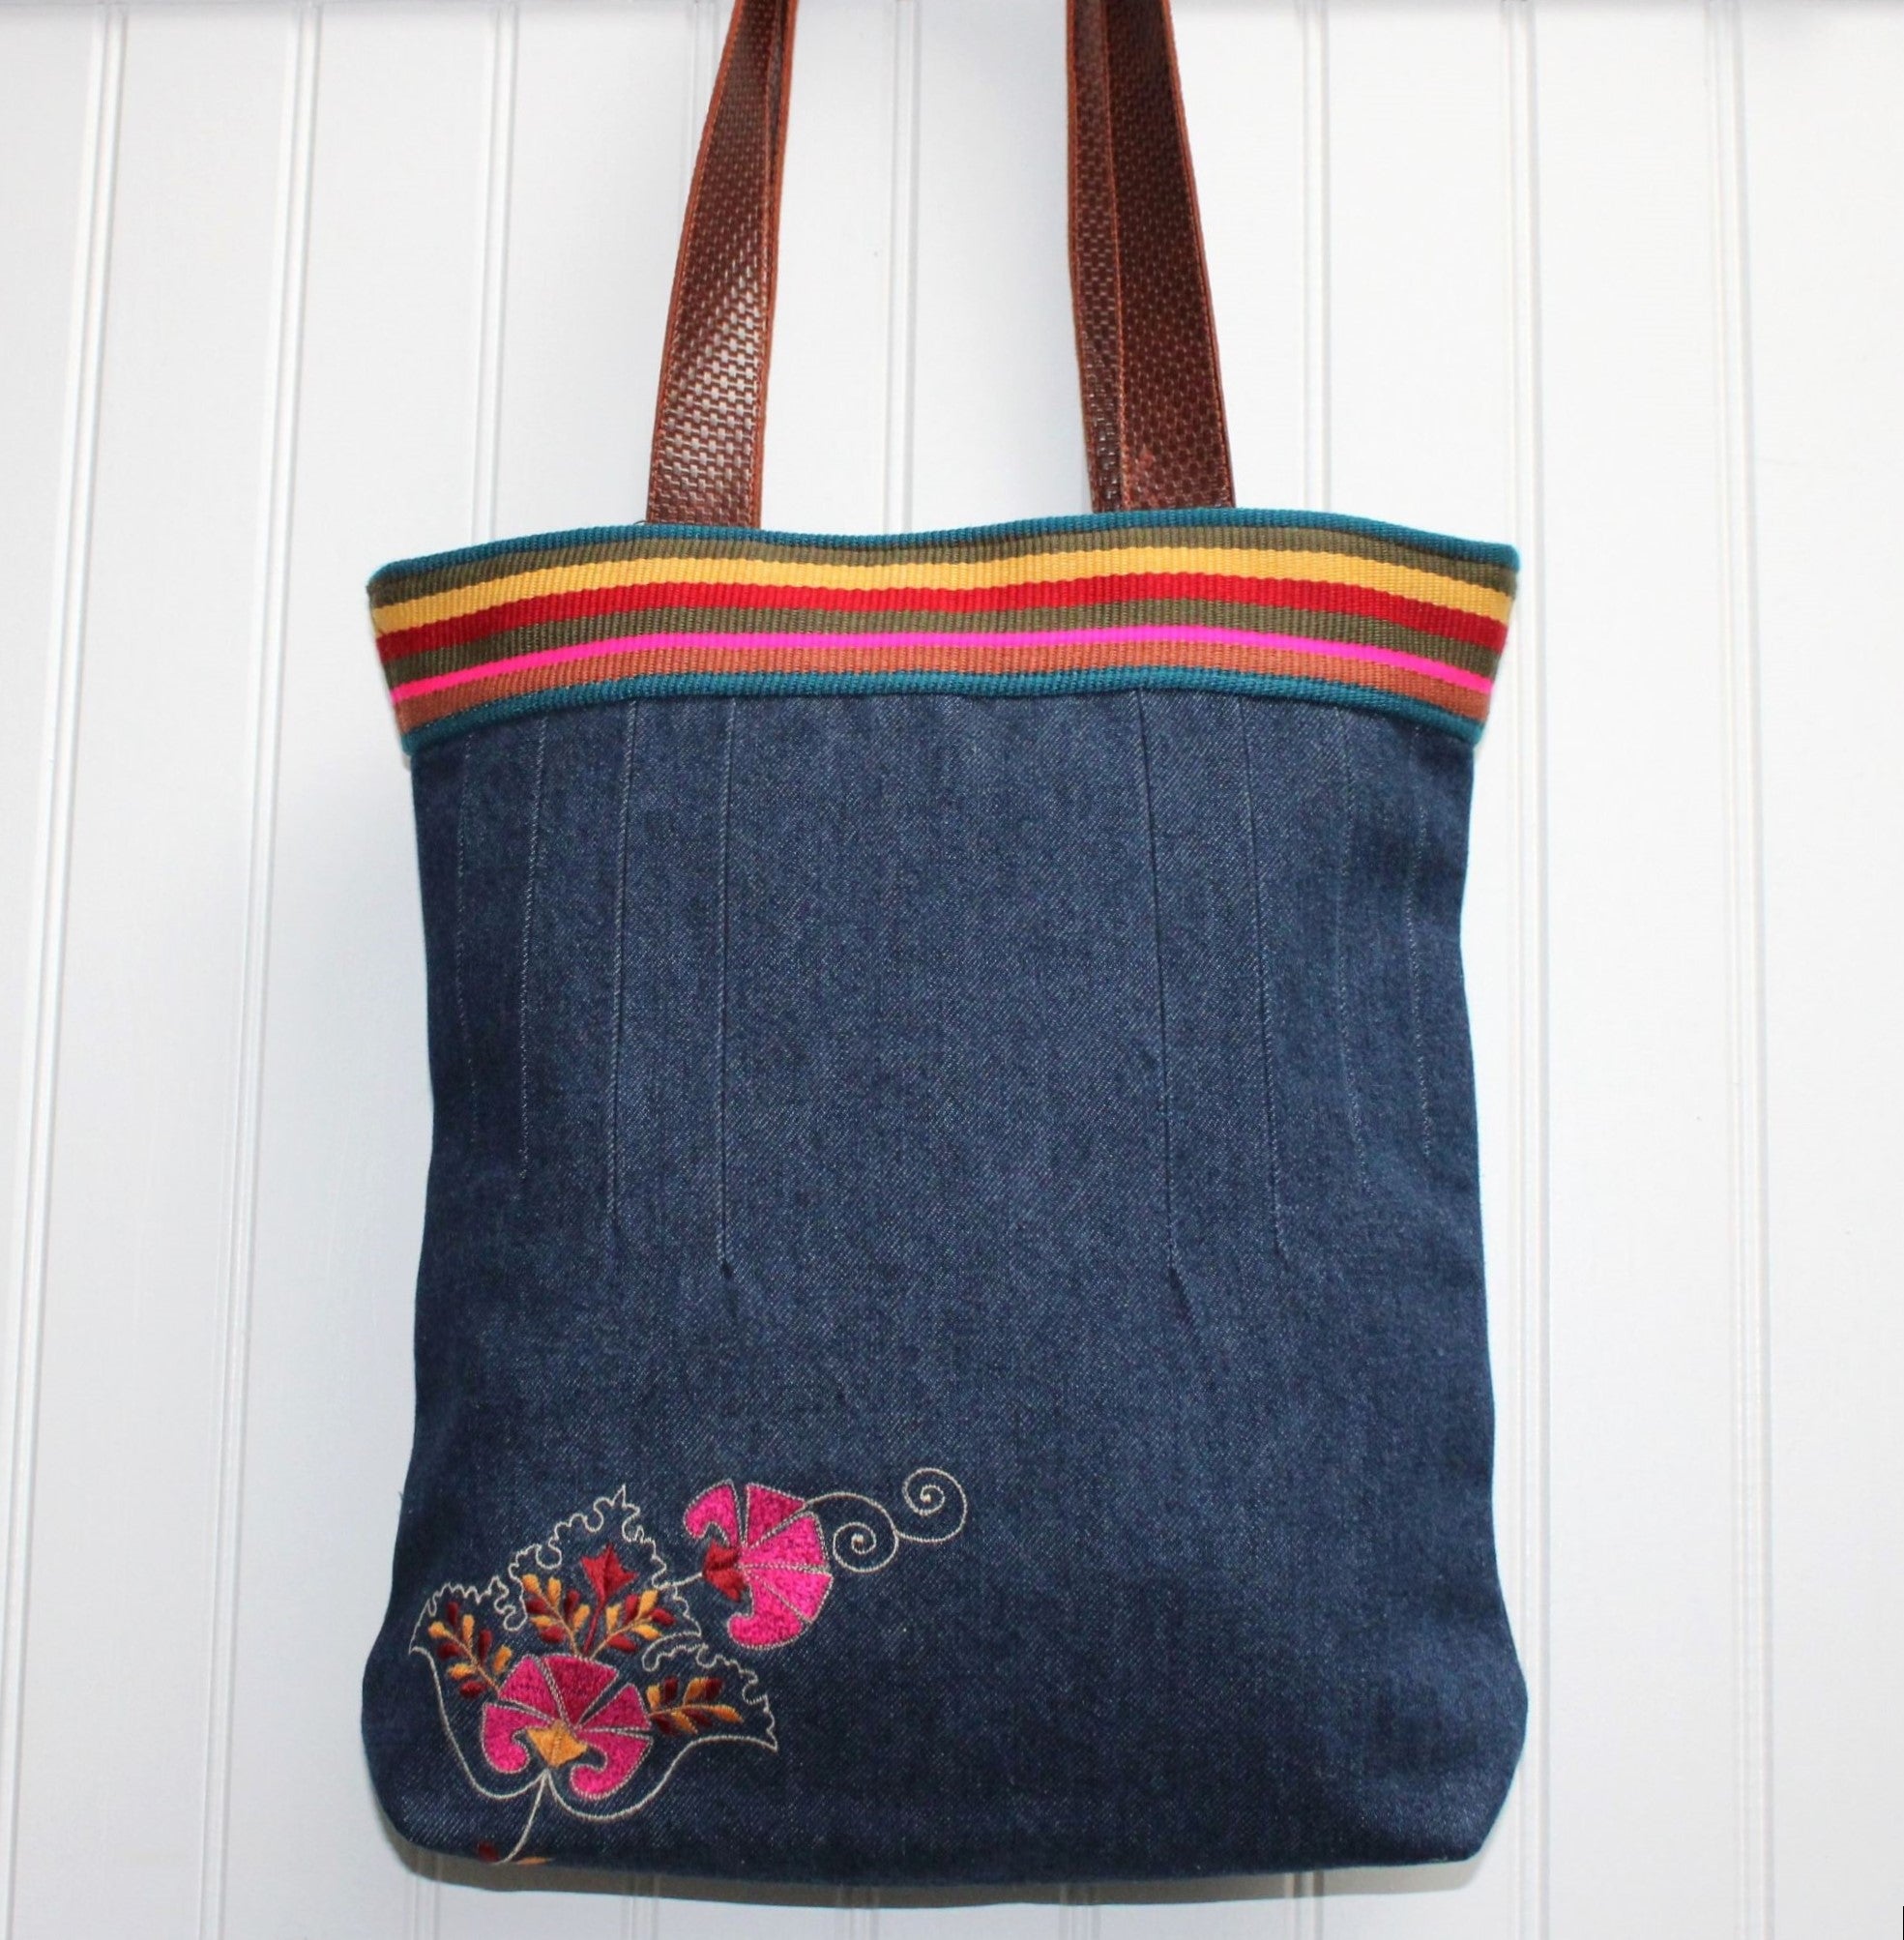 The Embroidered Rainbow Tote